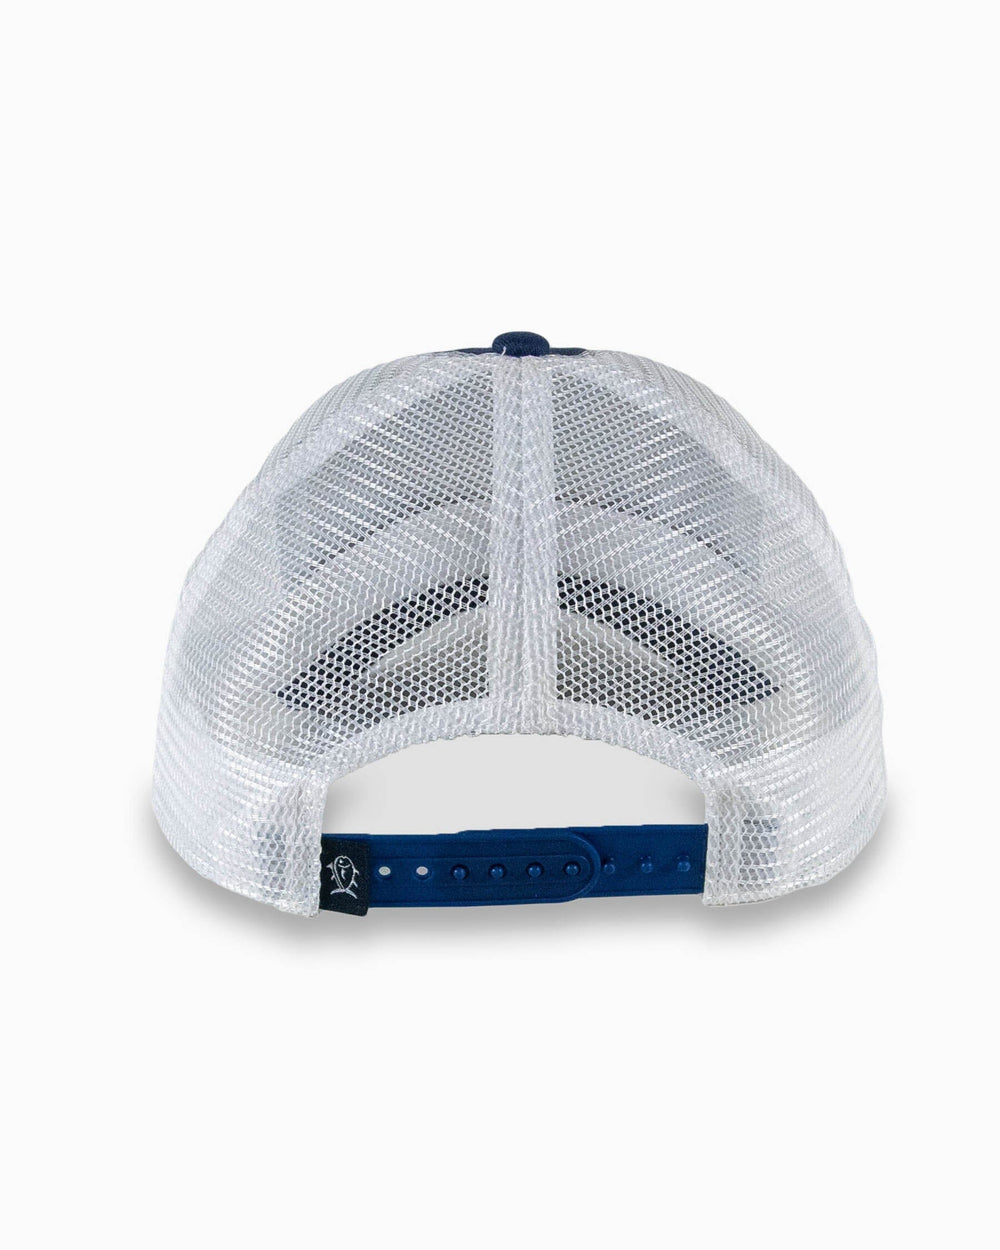 The back view of the Southern Tide Classic Stripe Trucker by Southern Tide - Navy